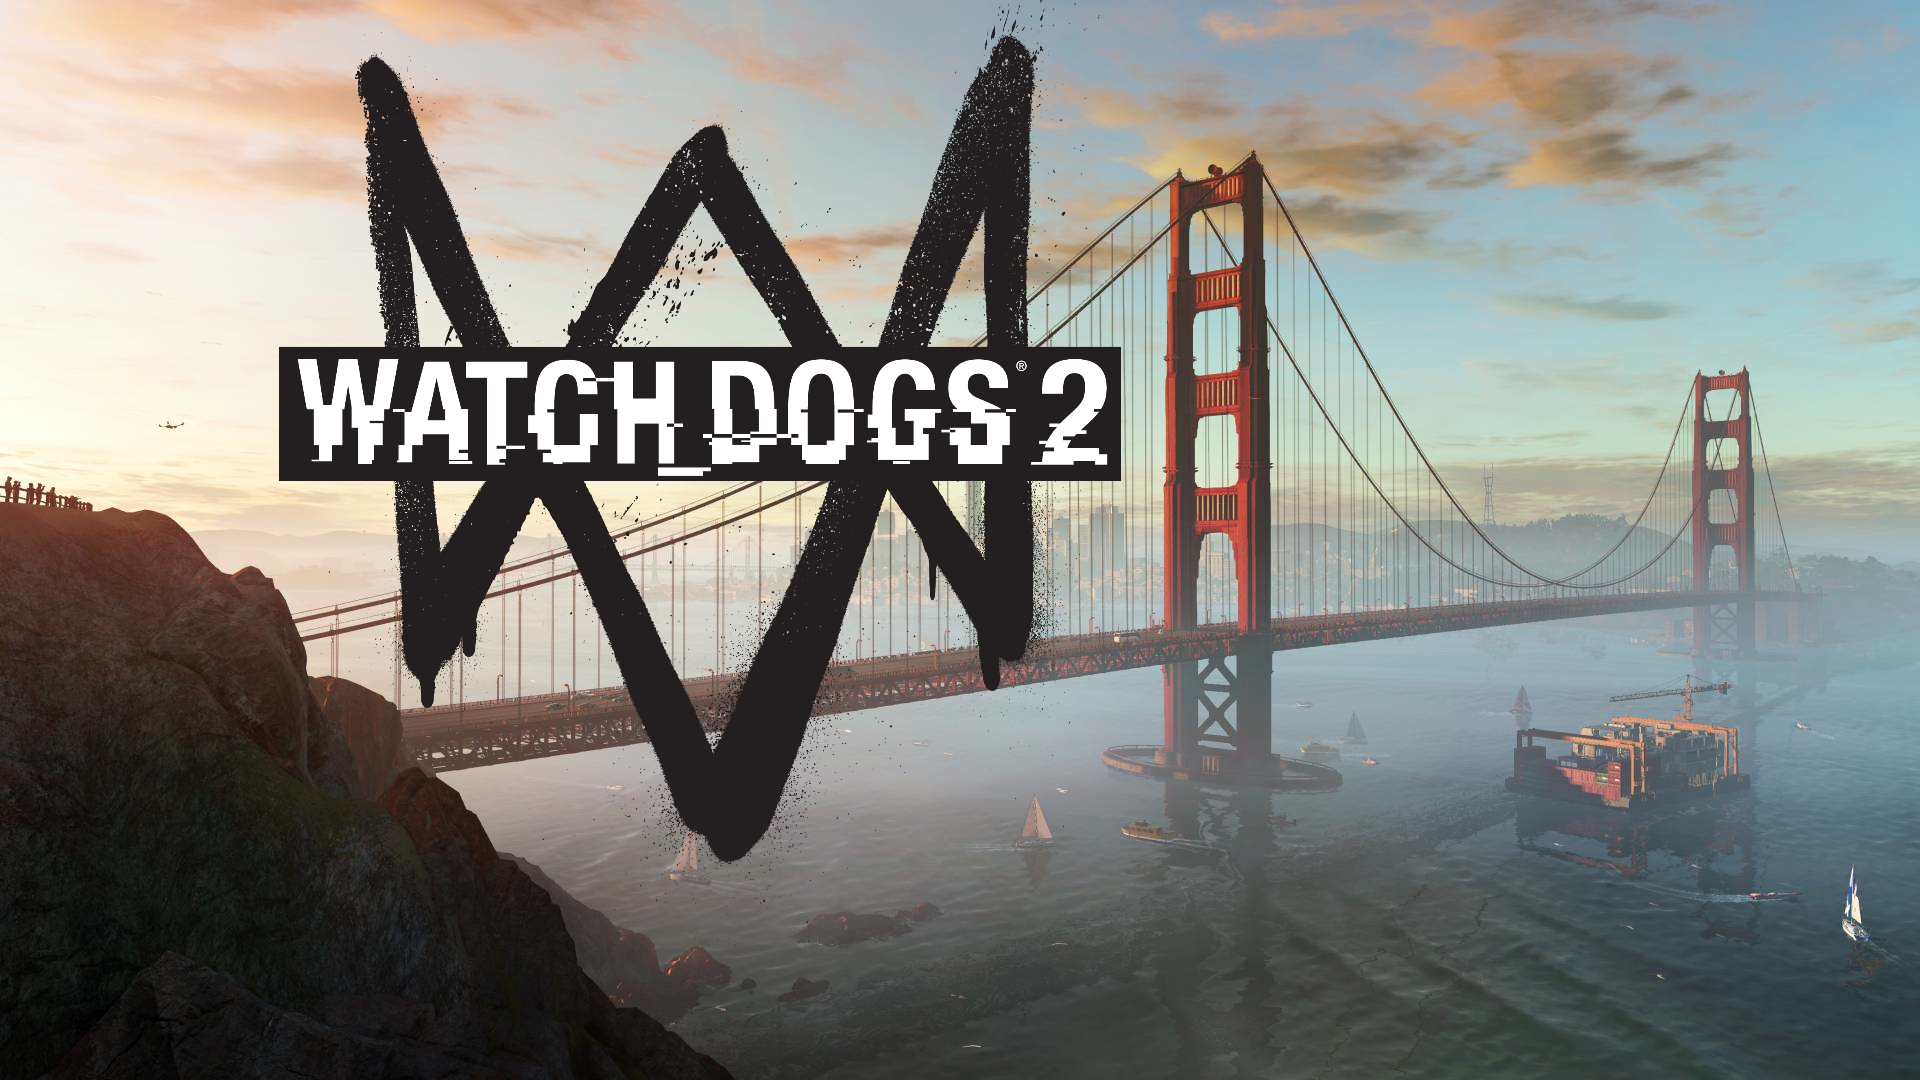 Watch Dogs 2 Wallpaper, Picture, Image